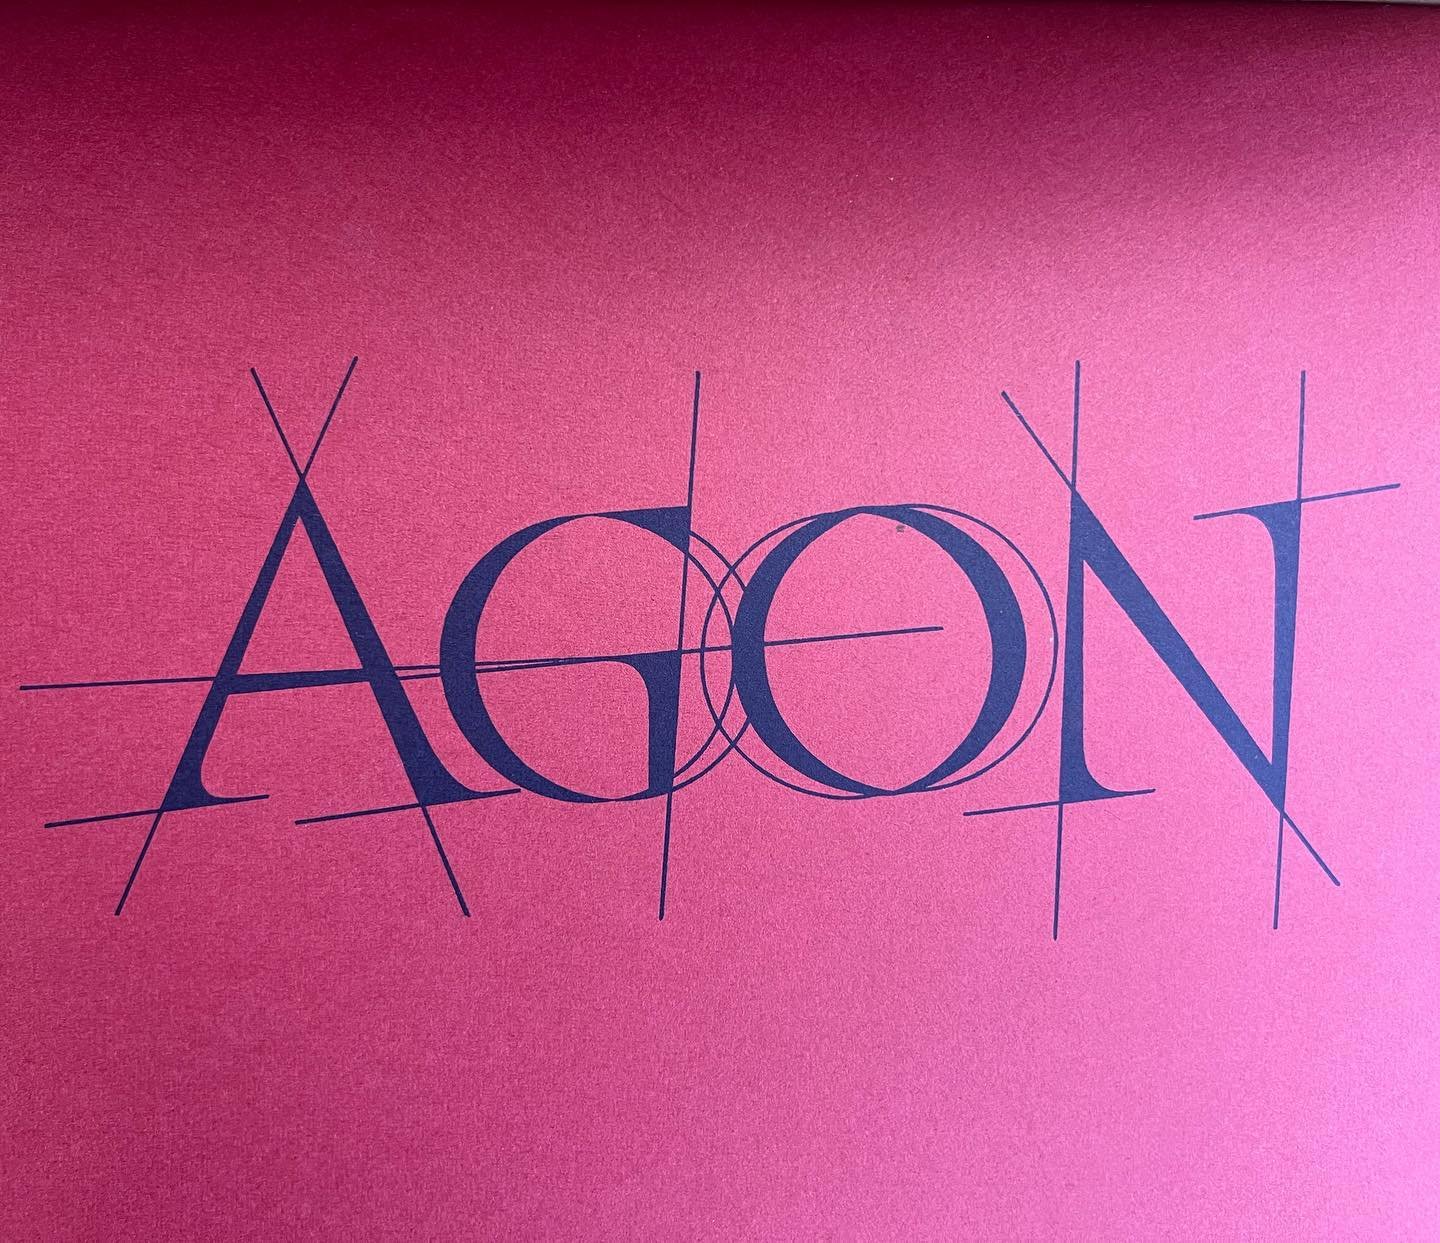 Agon by David Kindersley
.
Construction lines and some